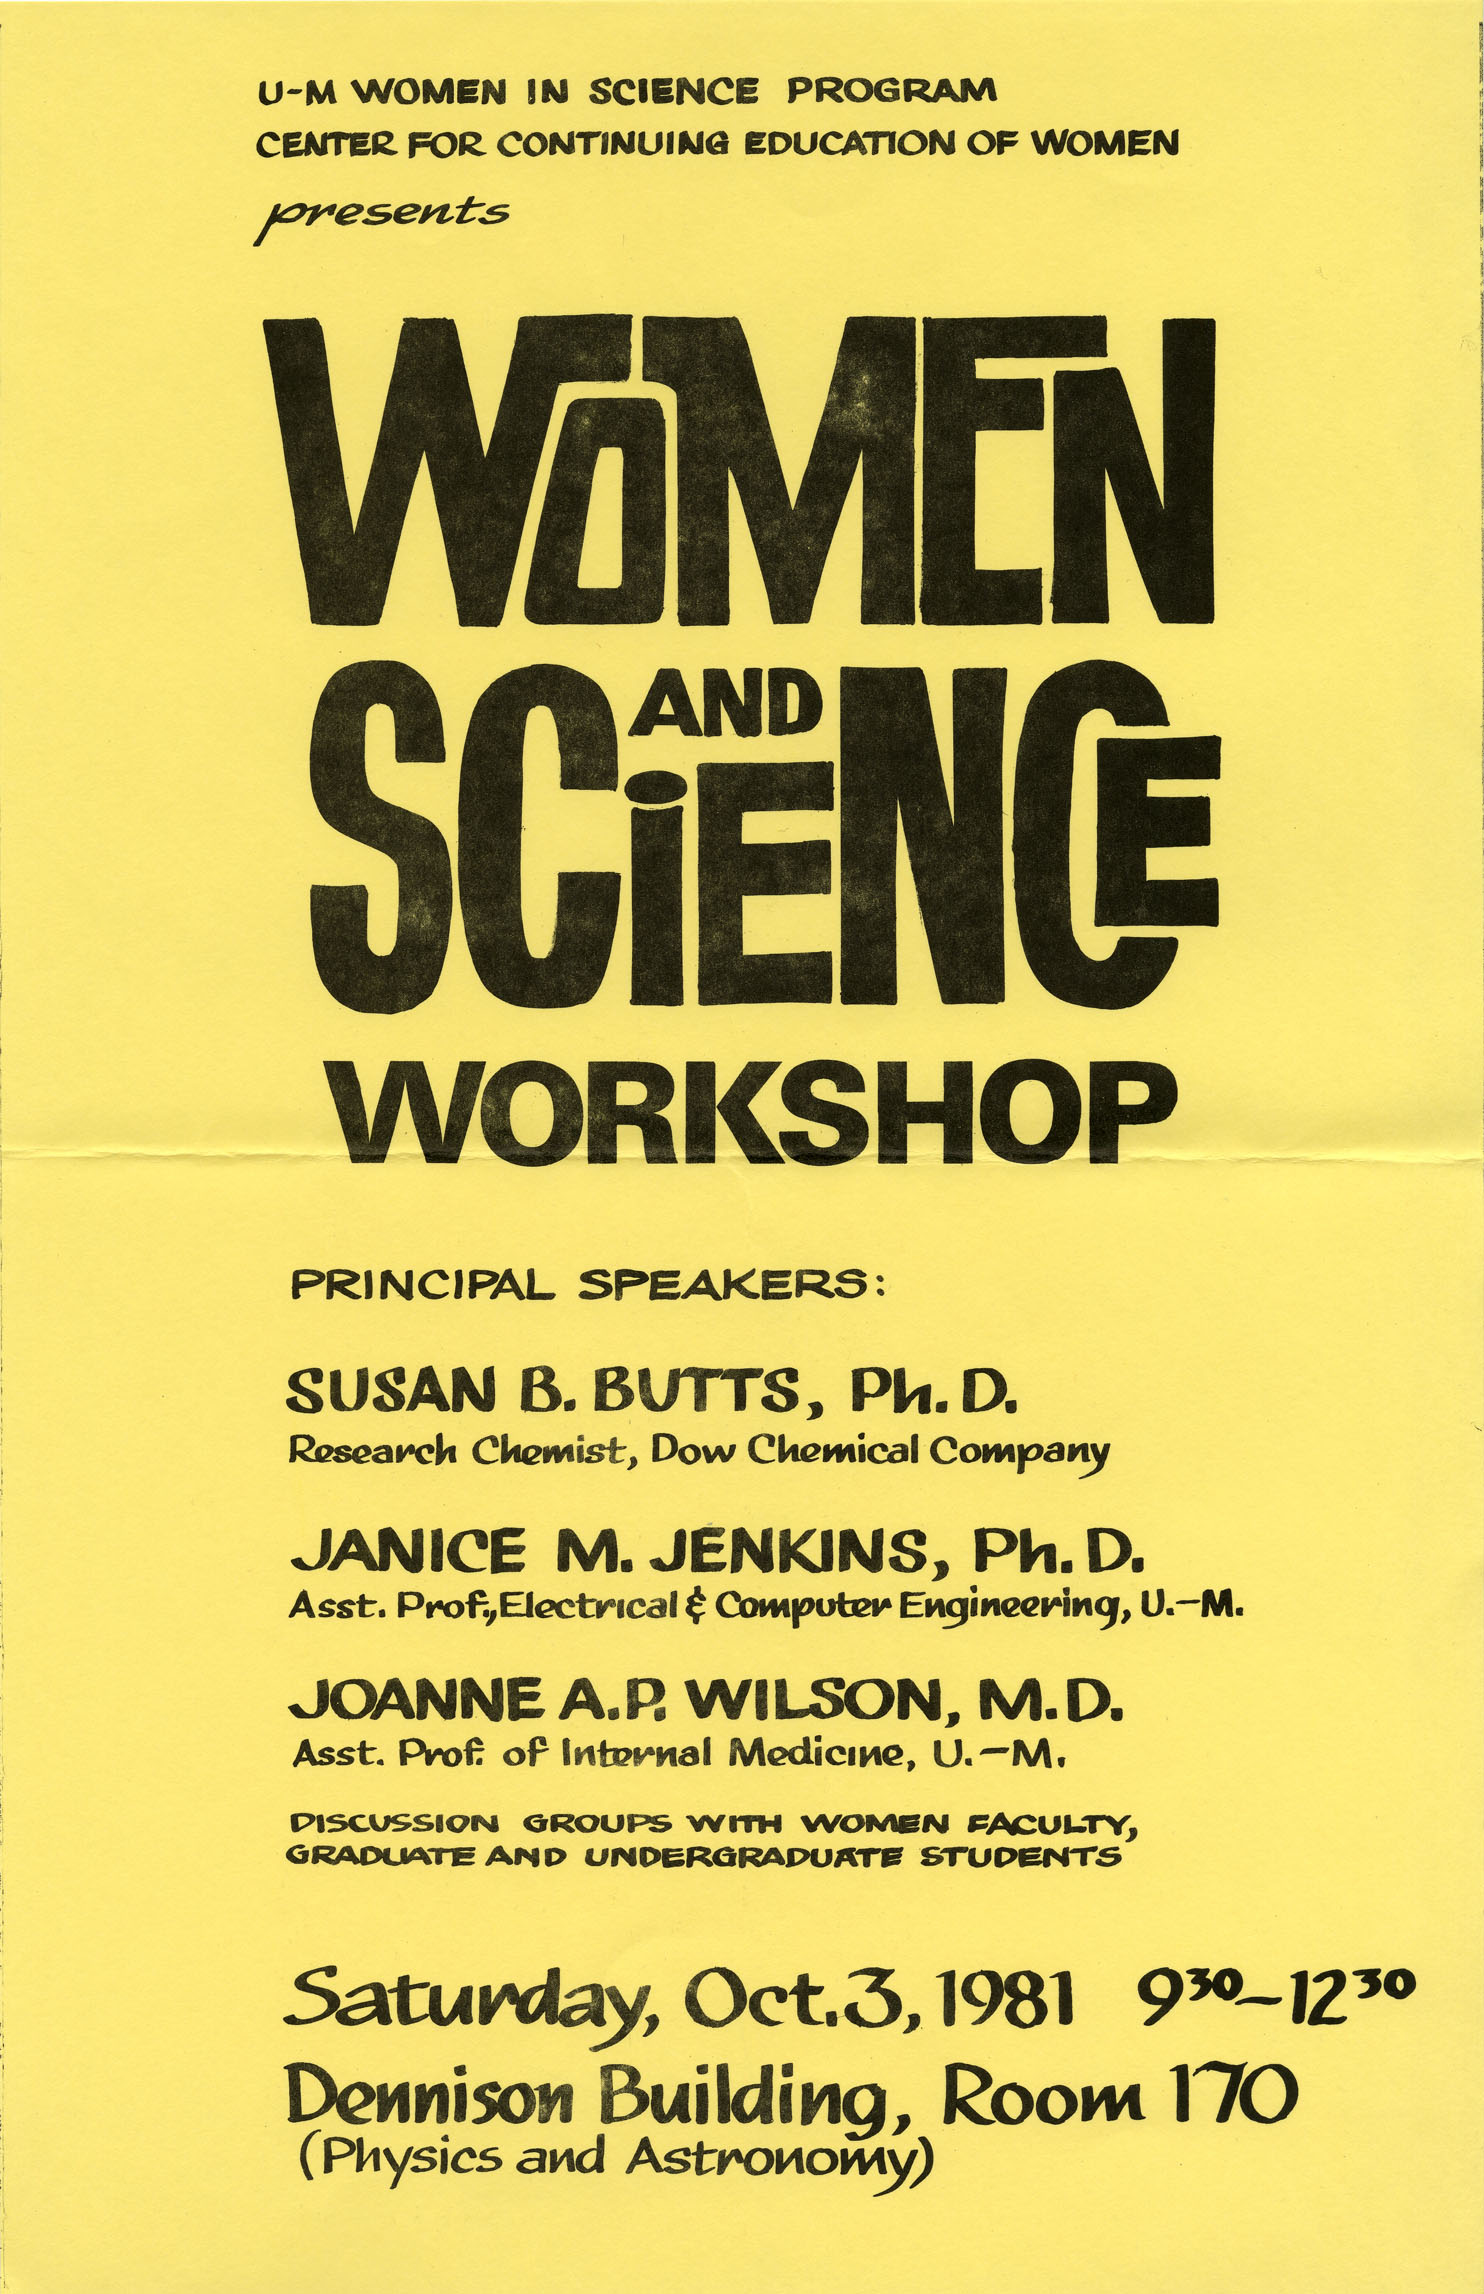 Women and Science Workshop poster, 1981